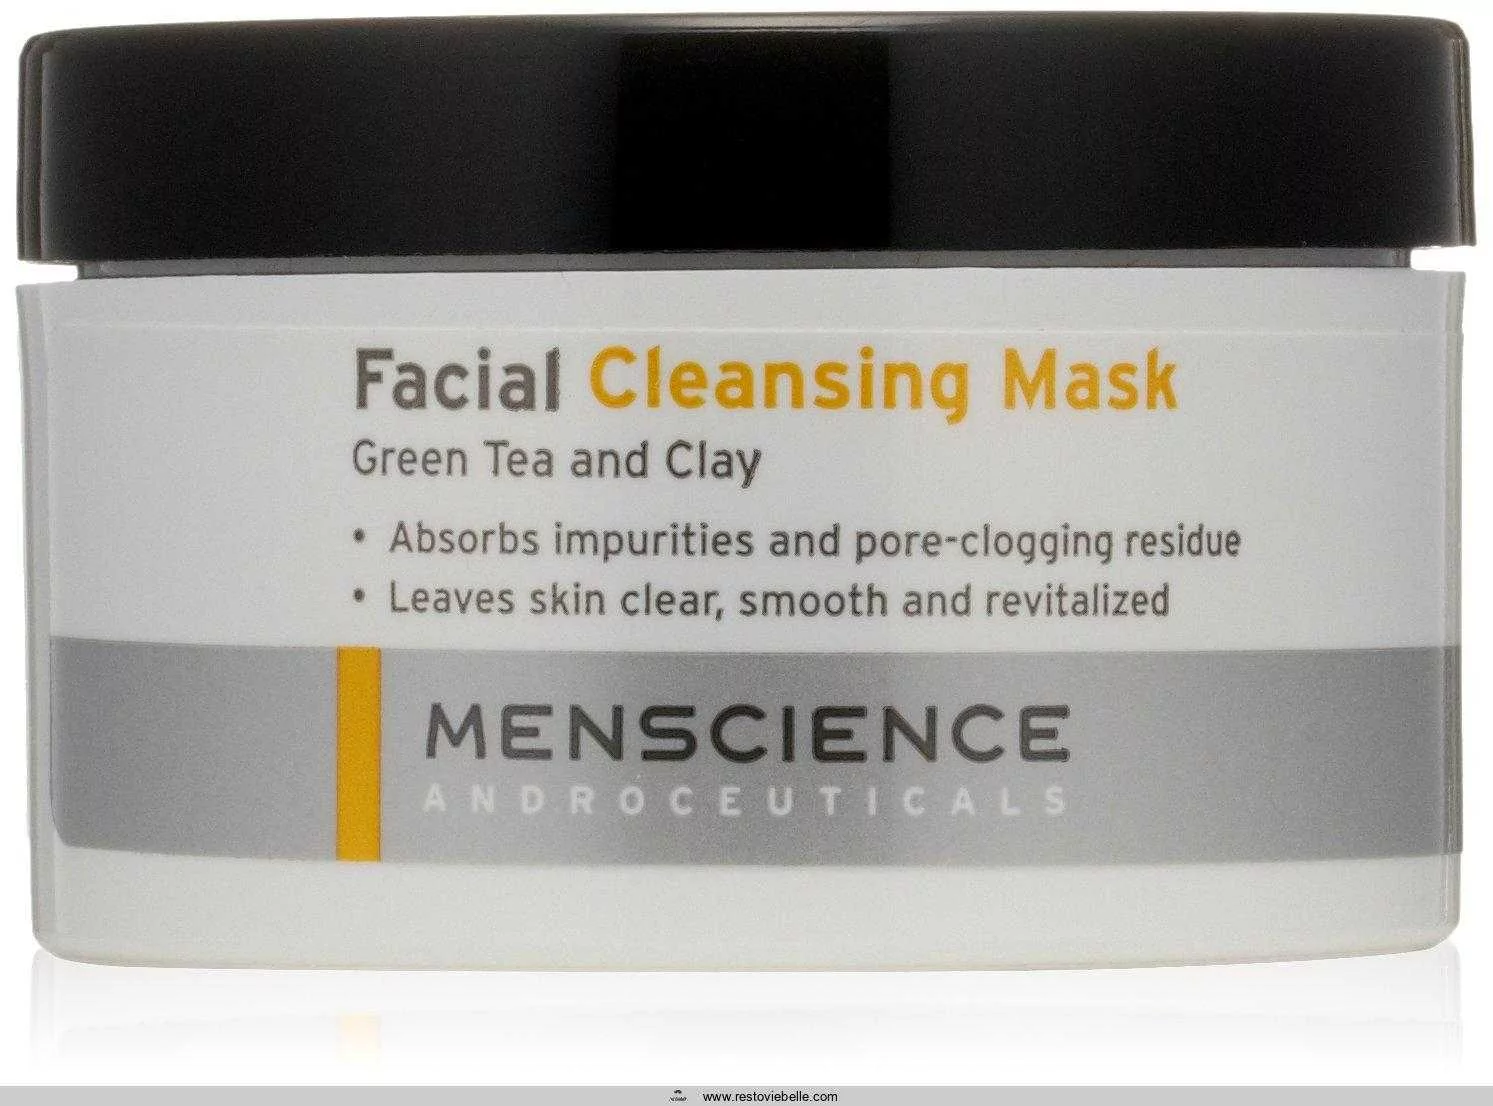 Menscience Androceuticals Facial Cleansing Mask